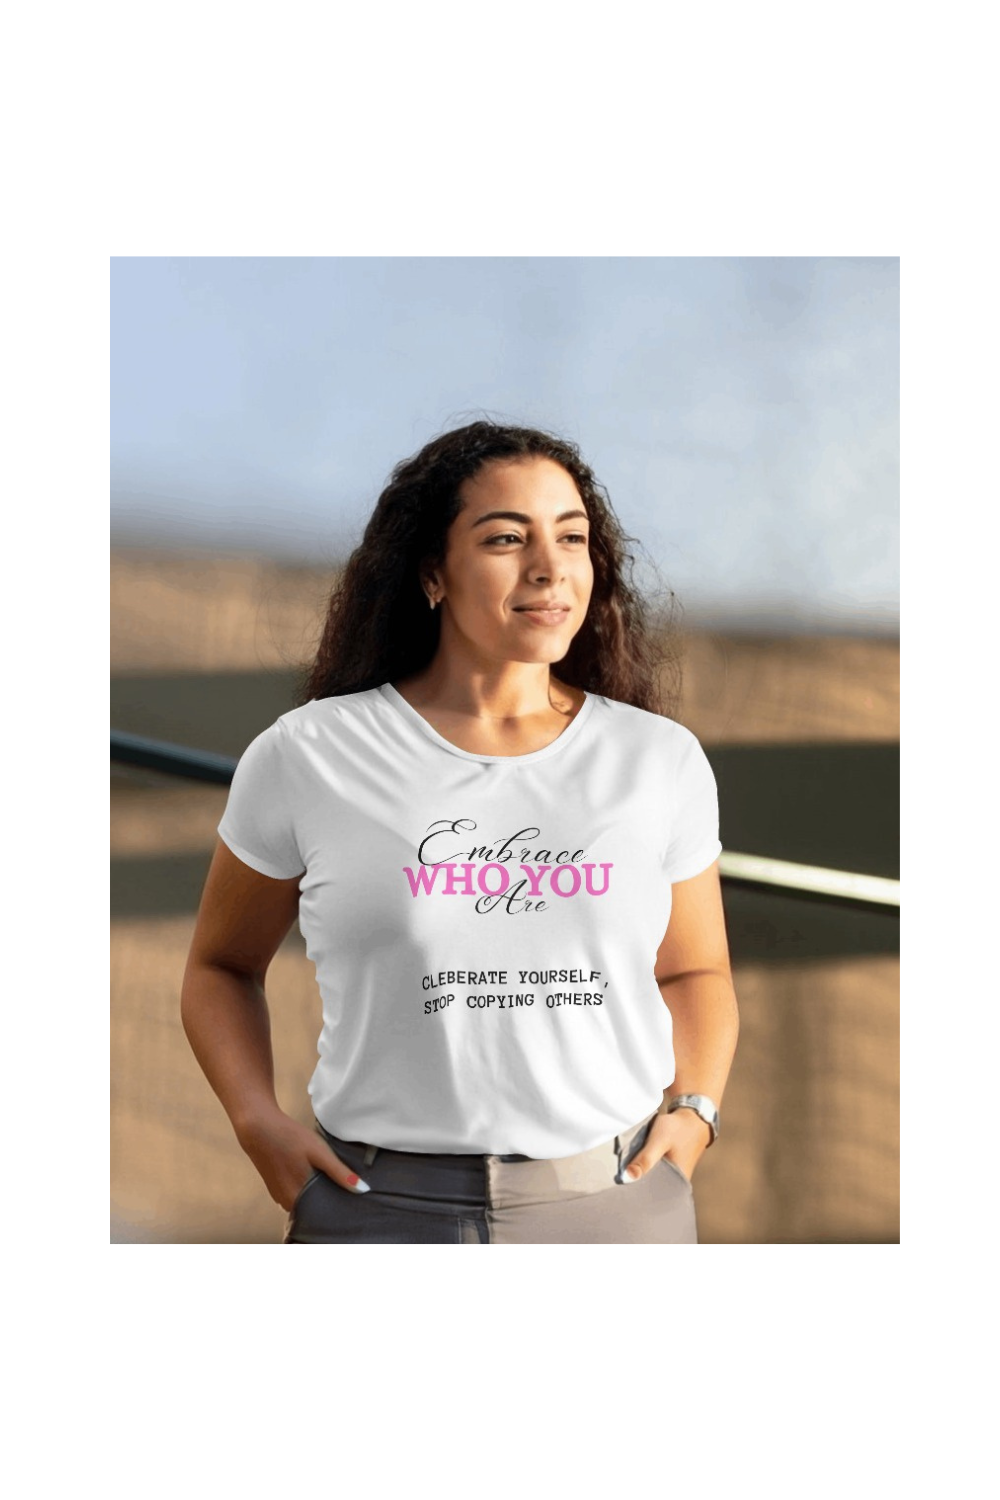 4-in-1 Women T-shirt designs pinterest preview image.